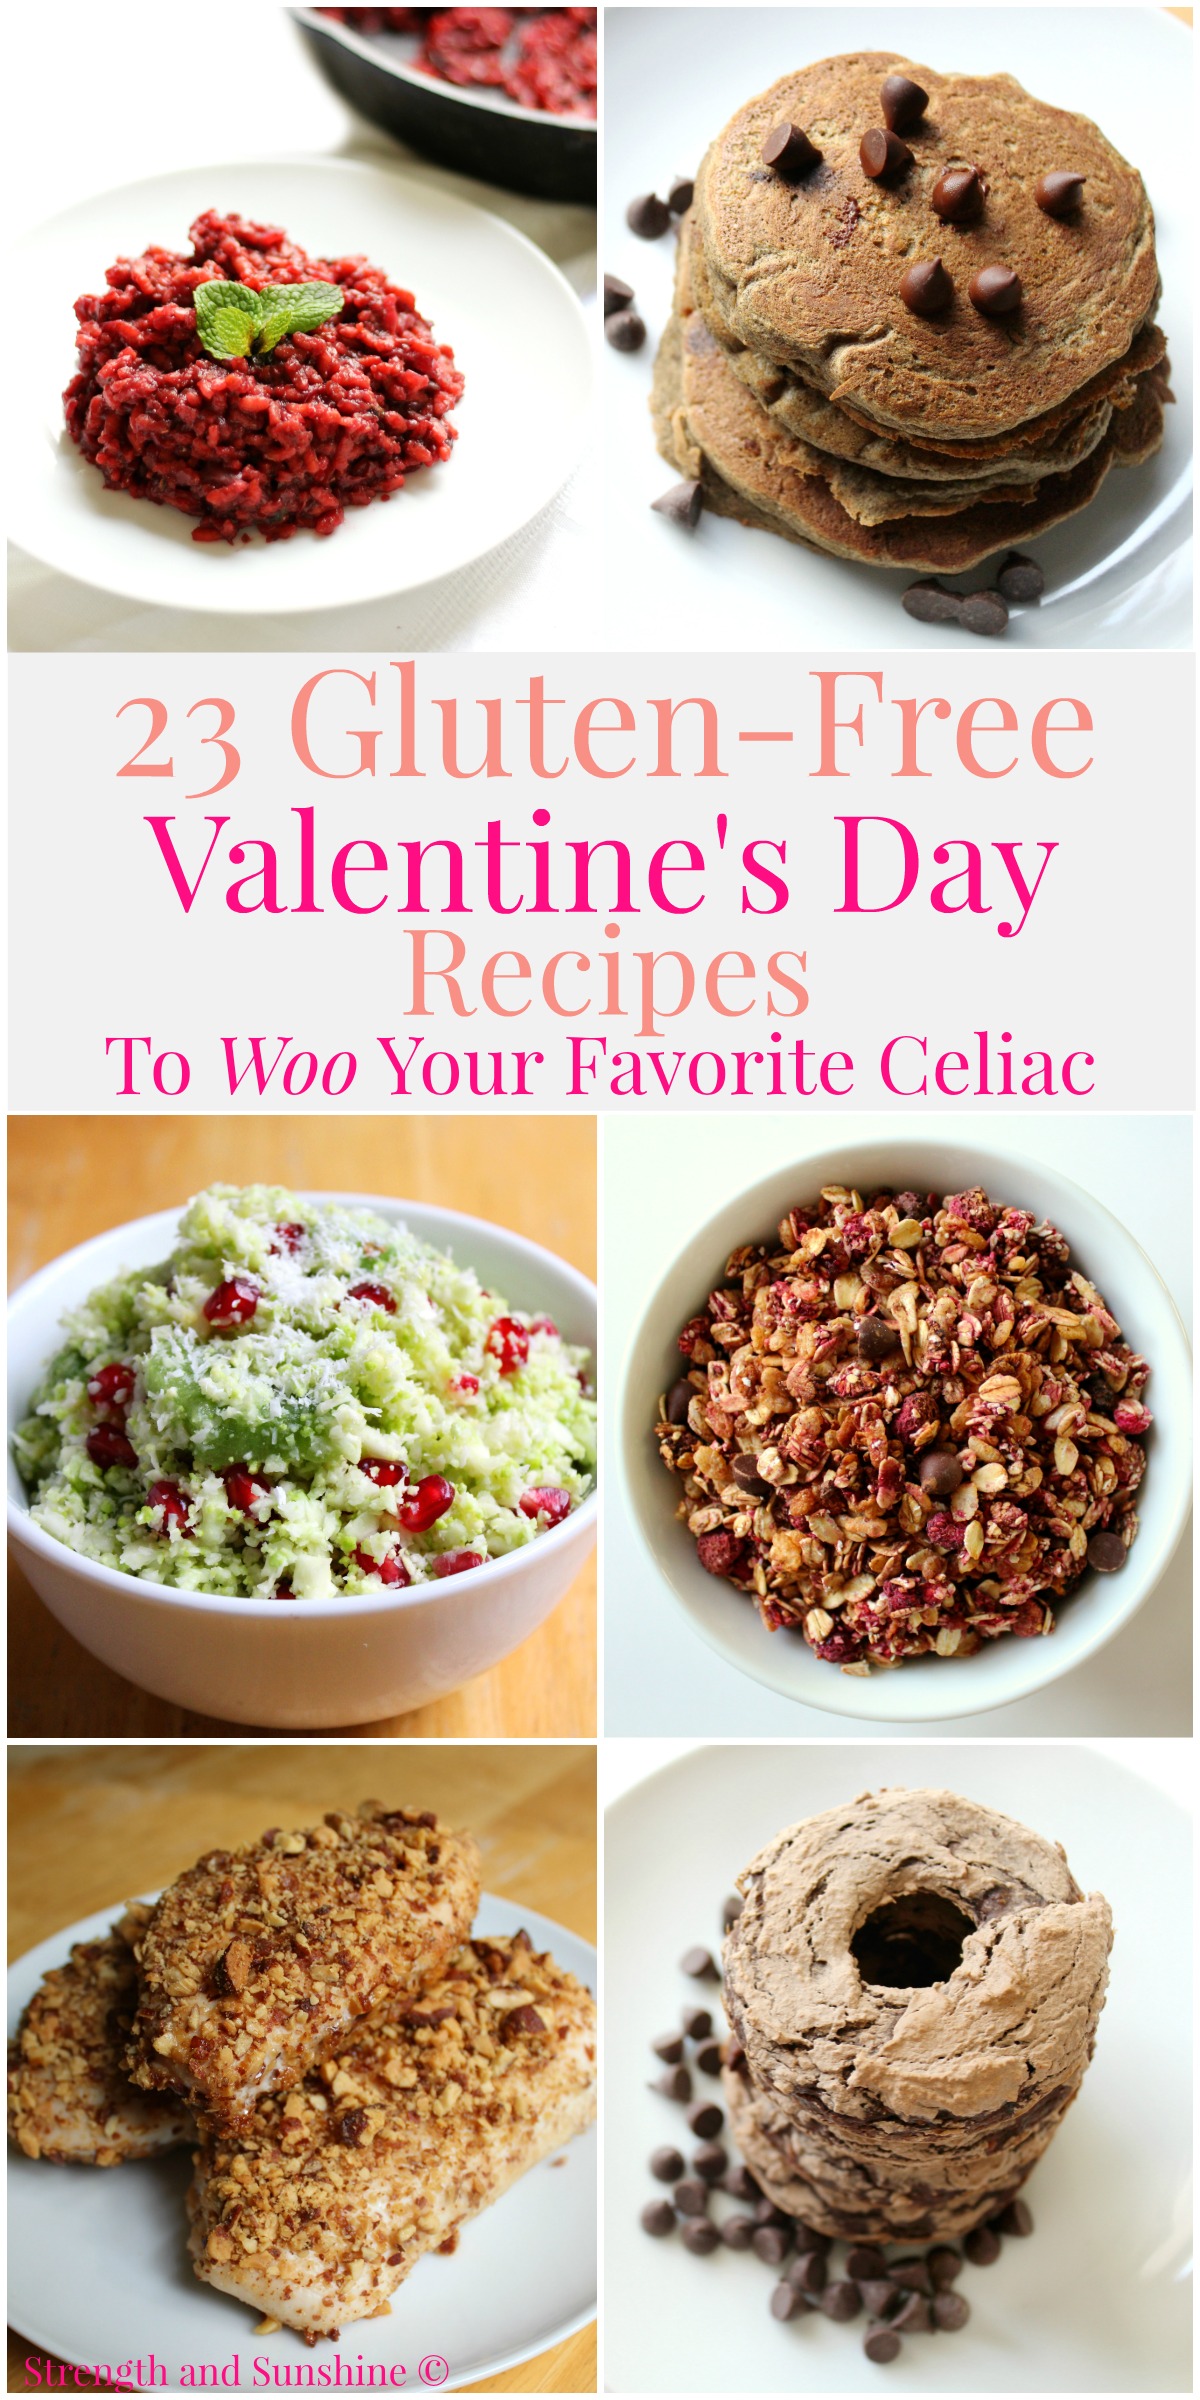 23 Gluten-Free Valentine's Day Recipes To Woo Your Favorite Celiac | Strength and Sunshine @RebeccaGF666 Win the heart of any celiac with these 23 sweet and savory gluten-free Valentine's Day recipes. Nothing proves your love more than delicious and safe treats and eats that will woo any celiac in your life!